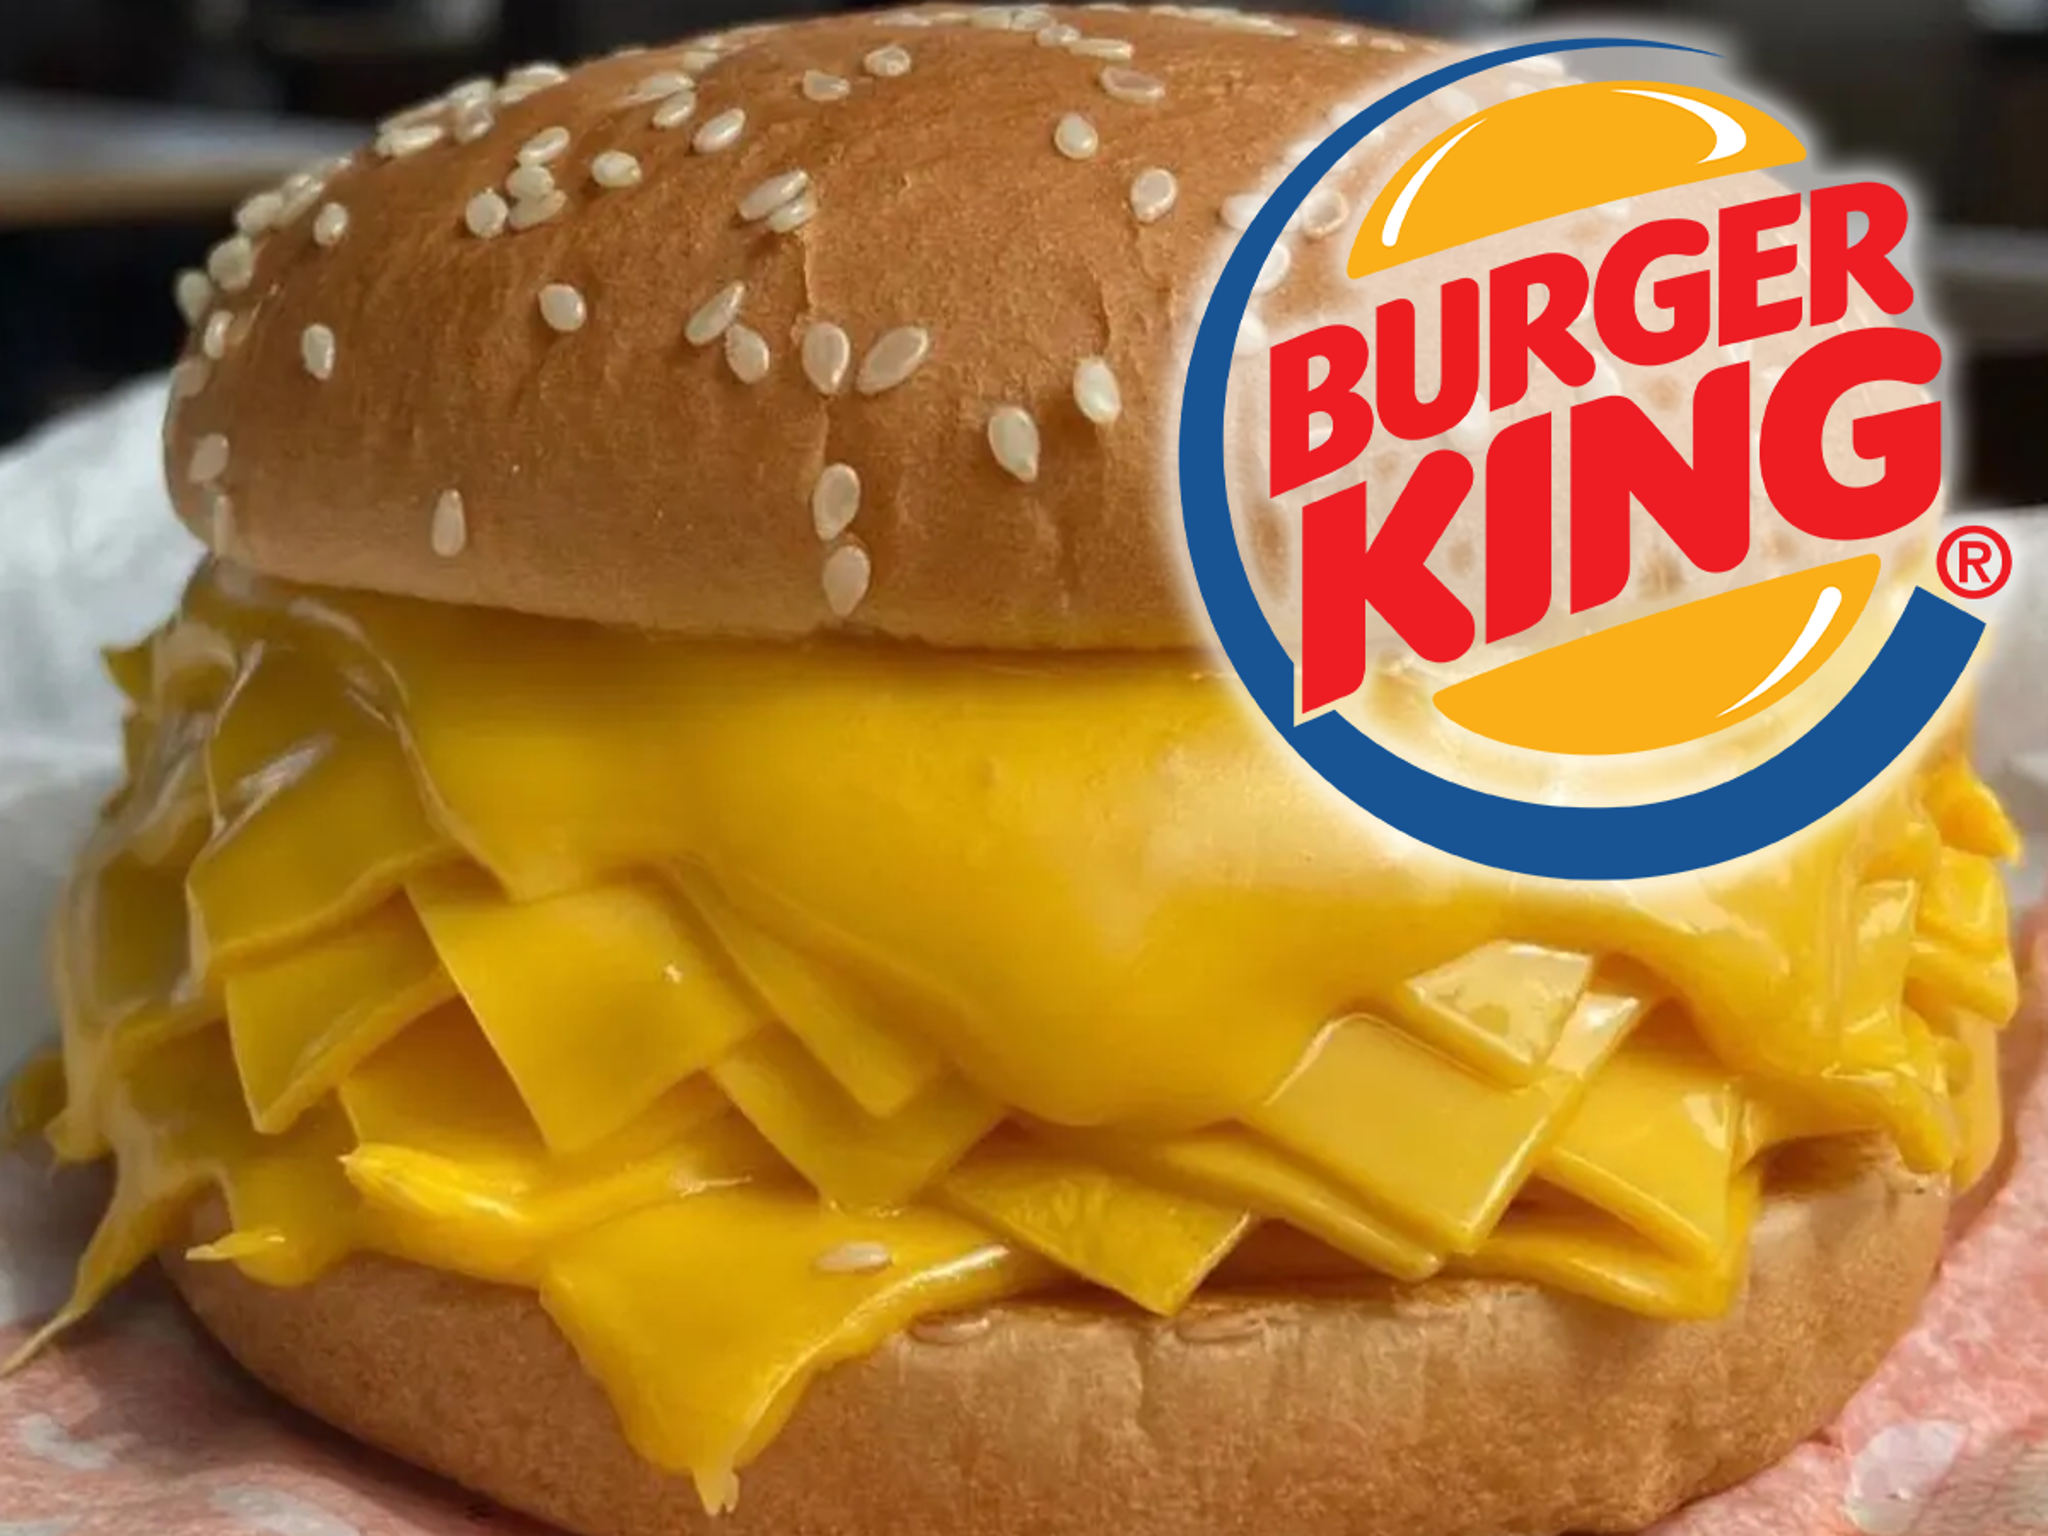 The Truth About The Nightmare King From Burger King